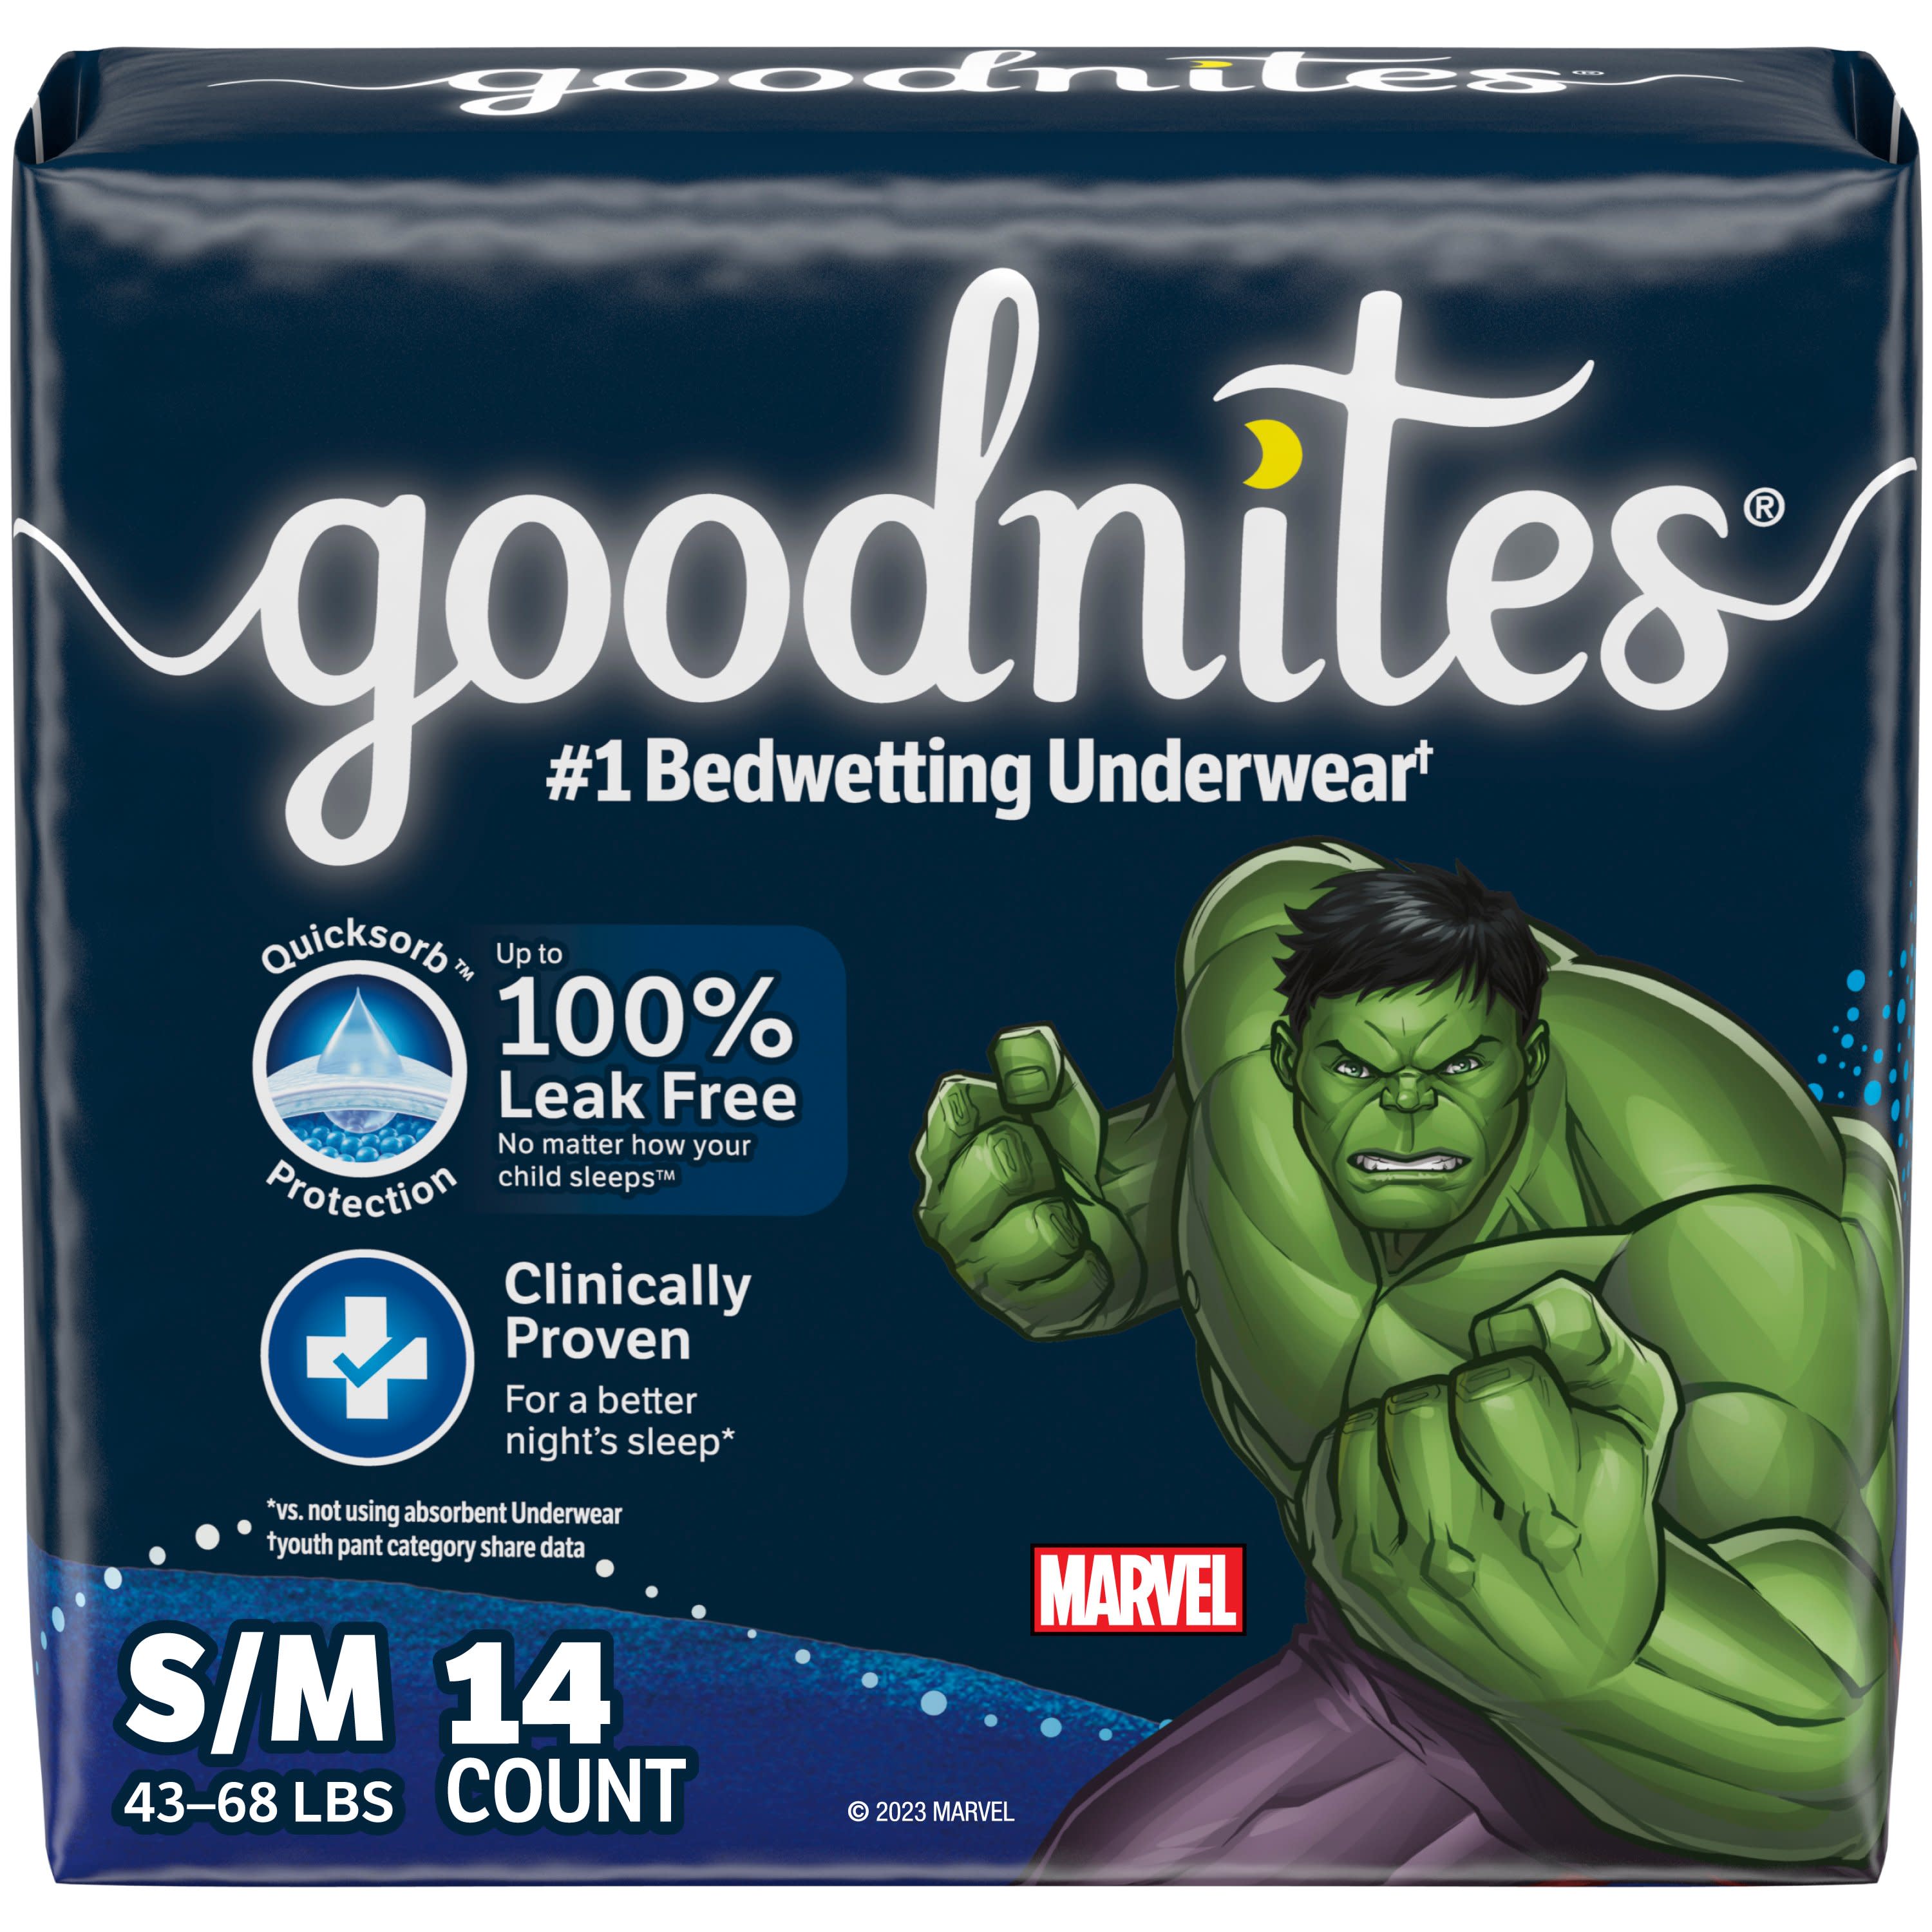 Goodnites Nighttime Bedwetting Underwear for Boys, S/M, 14 Ct (Select for More Options) - image 3 of 10